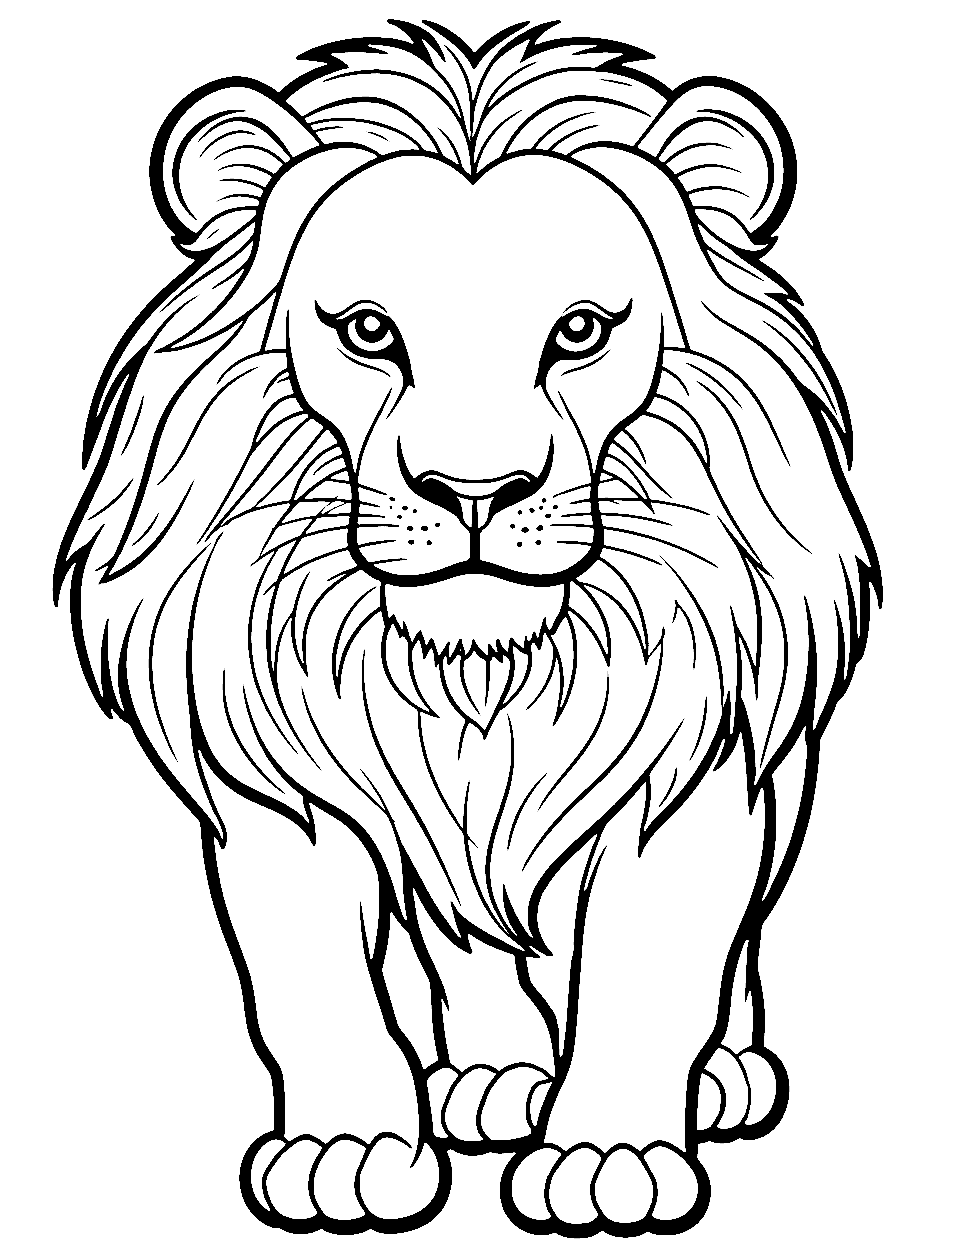 25 Lion Coloring Pages: Free Printable Sheets